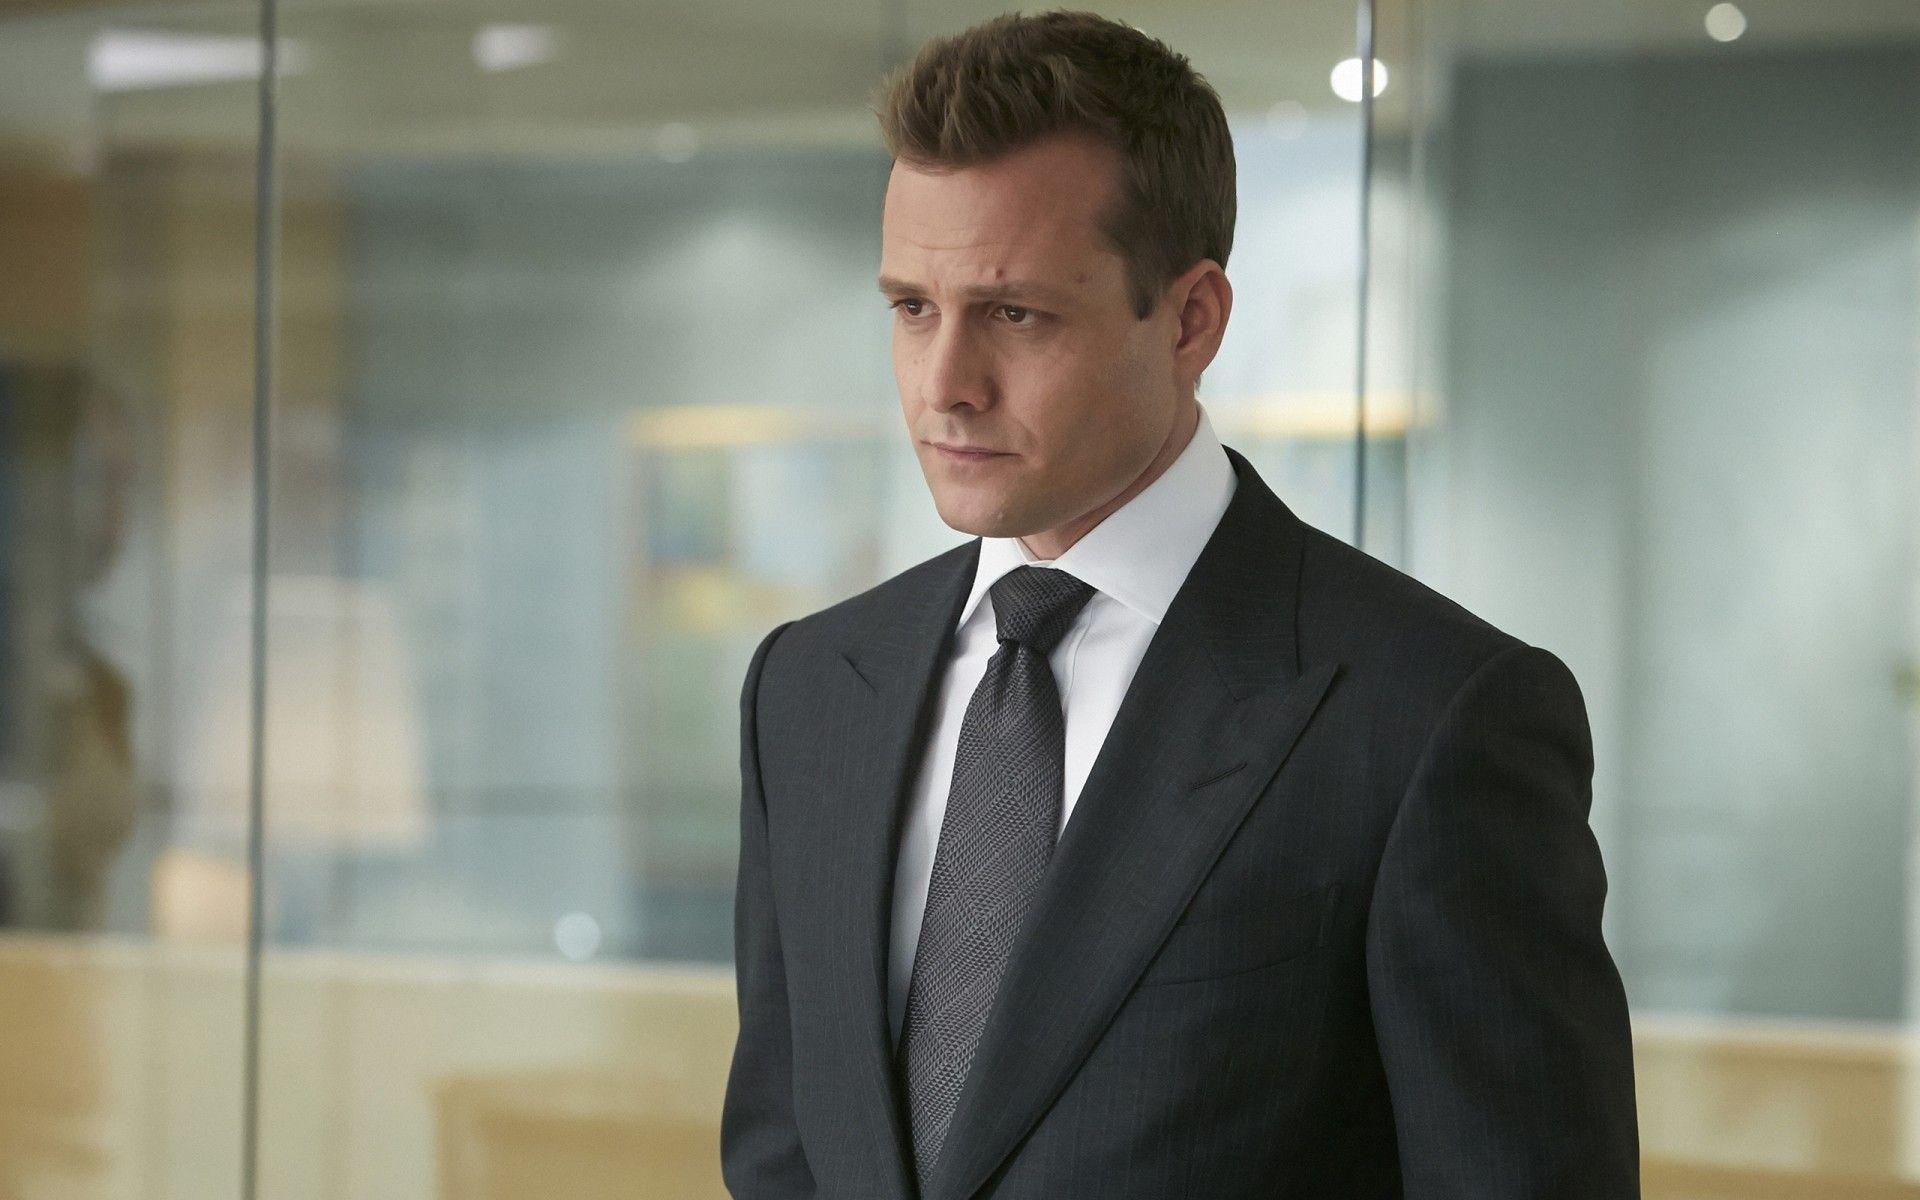 Harvey Specter Suits. Android wallpaper for free